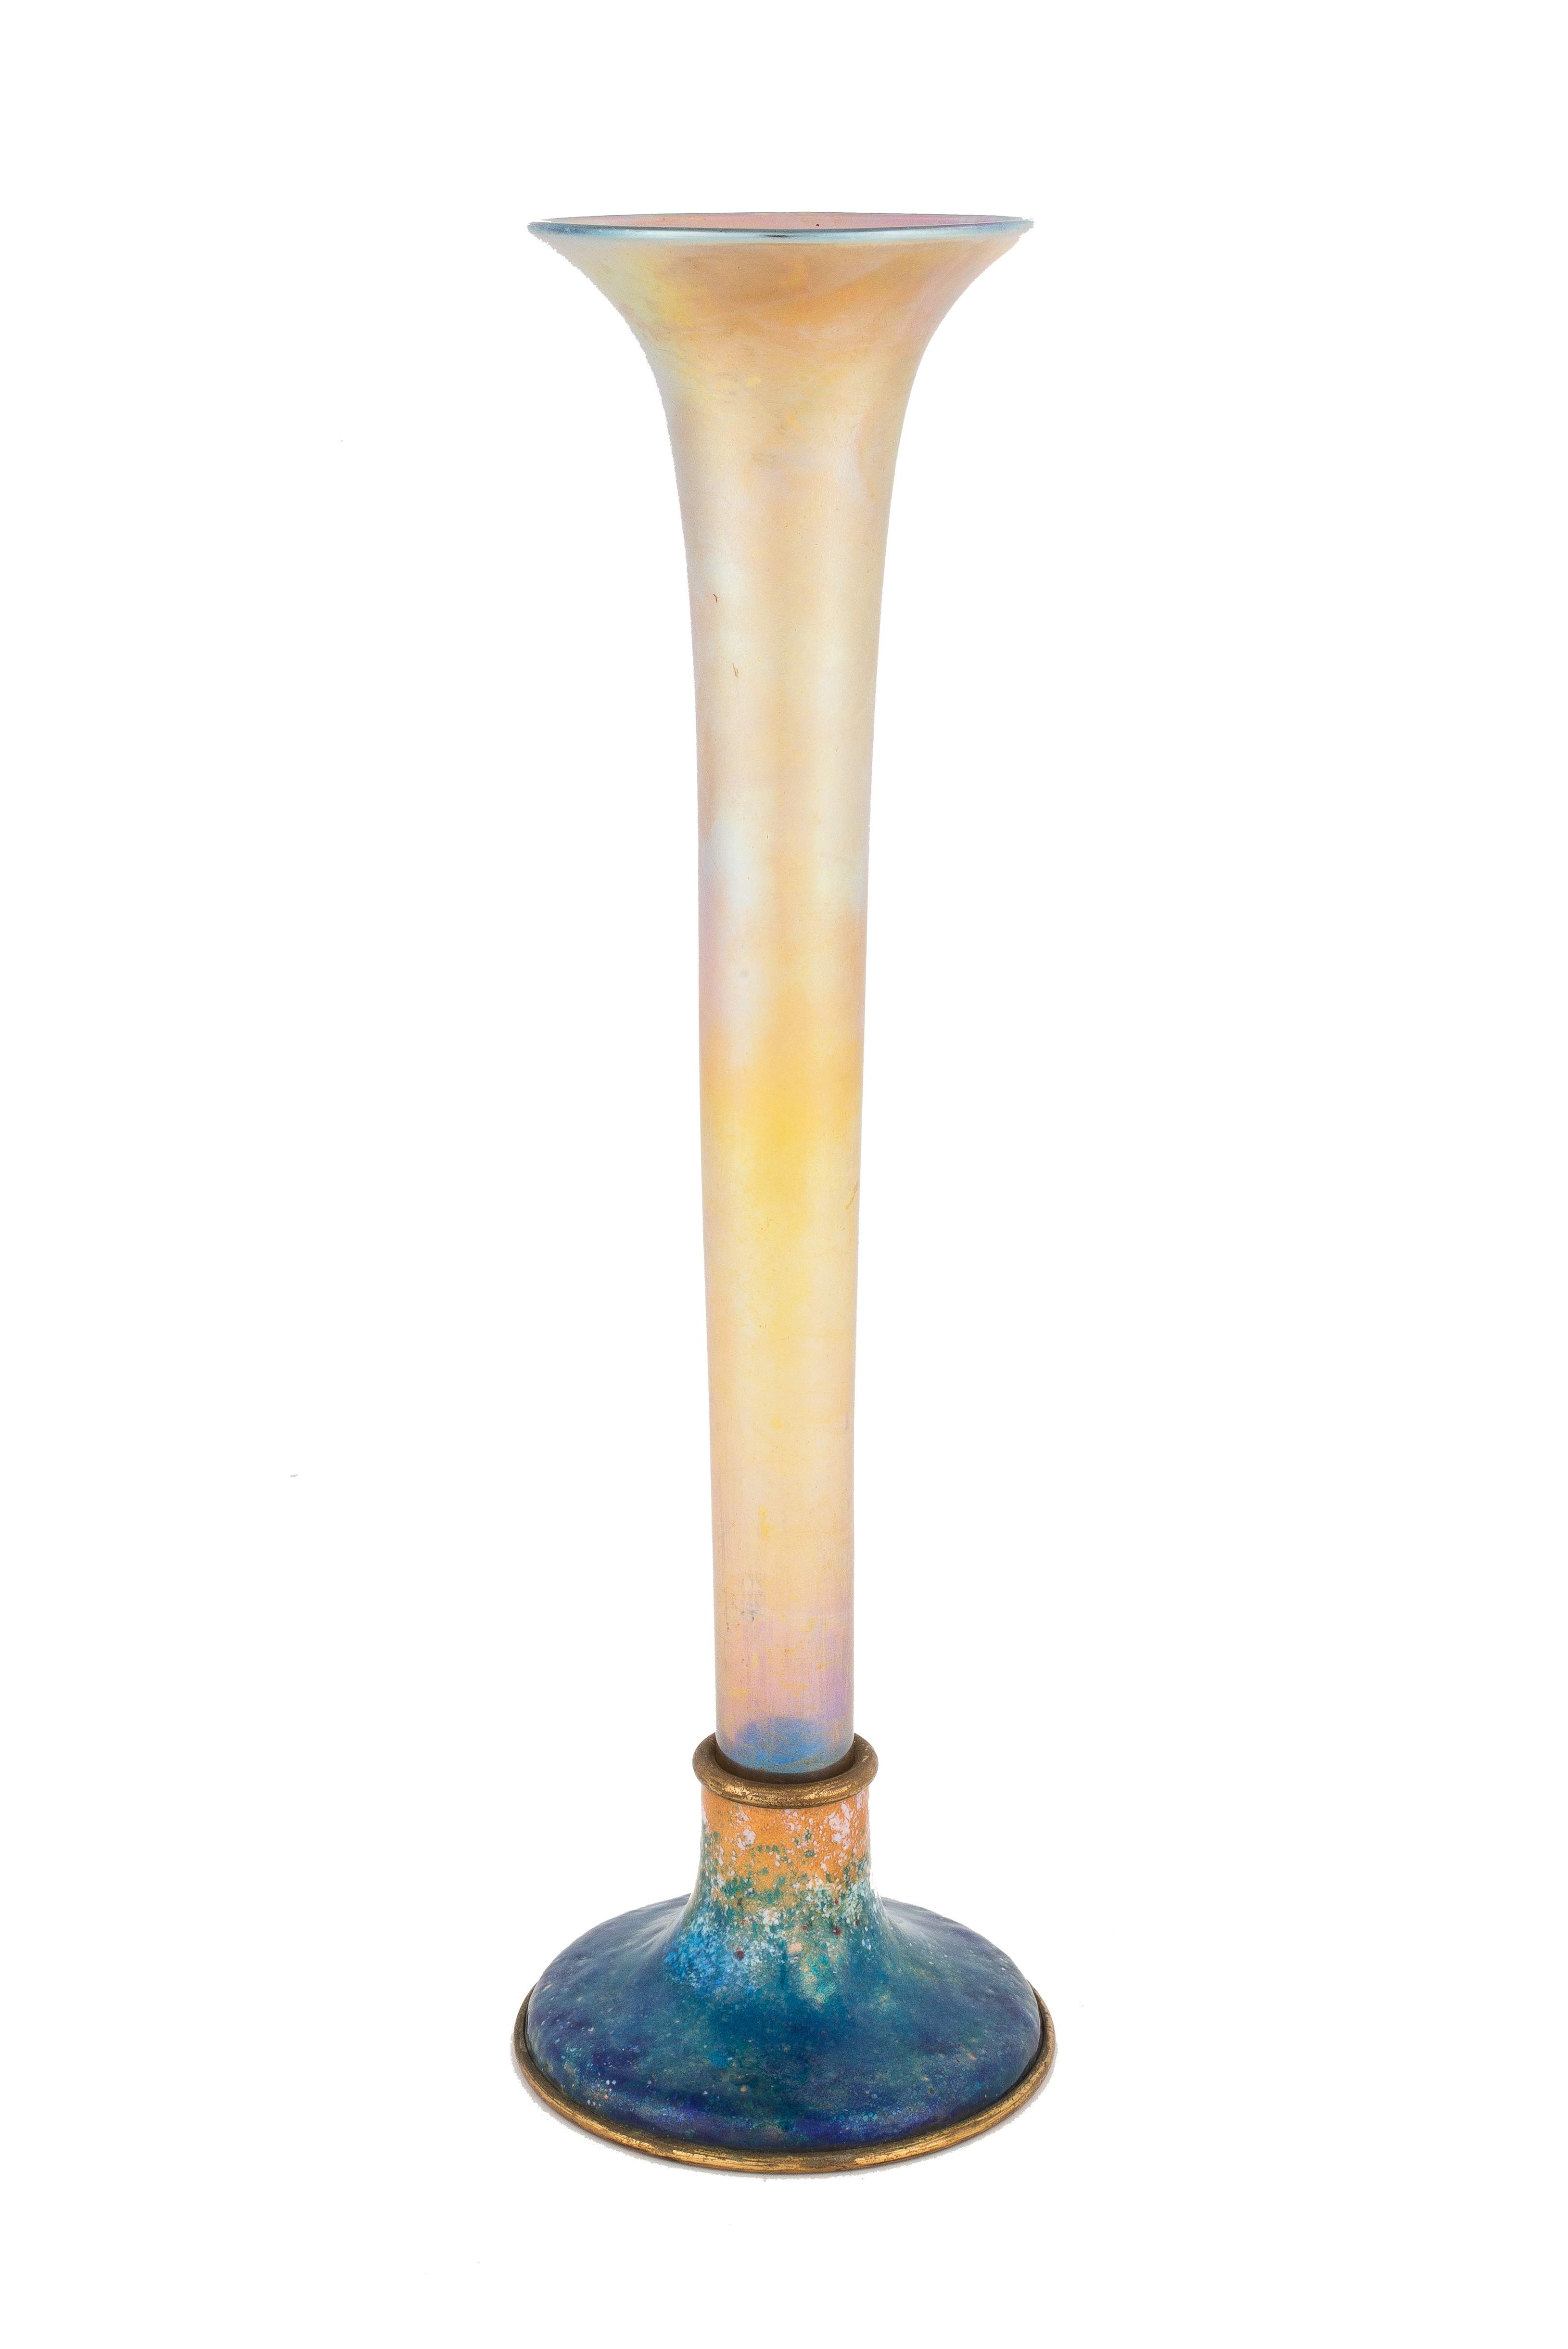 Louis C. Tiffany Furnaces Gold Iridescent Trumpet Vase with Enamel Foot ...